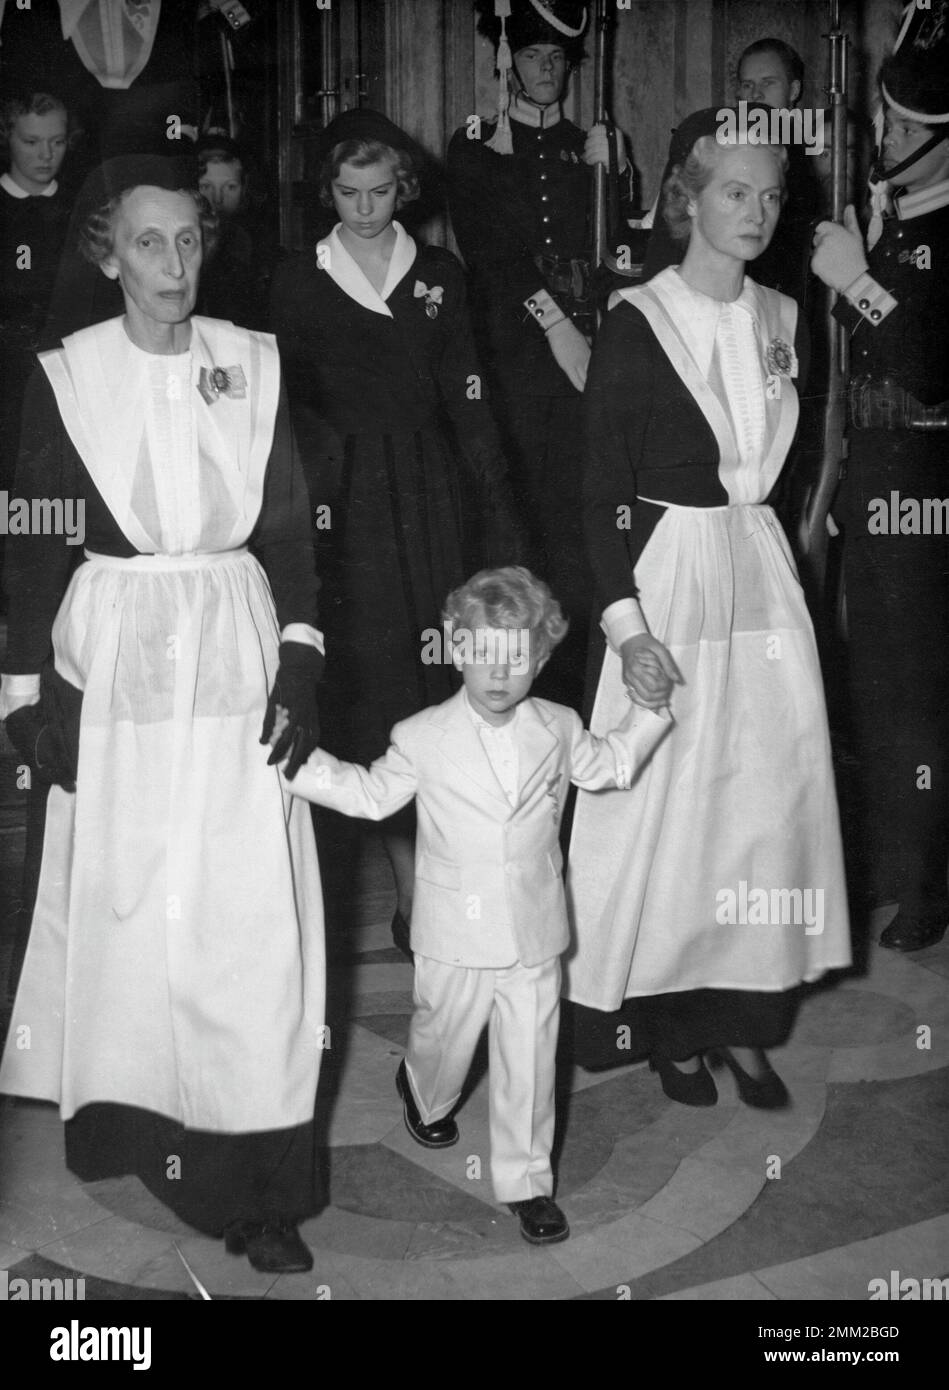 Carl XVI Gustaf, King of Sweden. Born 30 april 1946. Pictured here between Queen Louise of Sweden to the left and his mother princess Sibylla on the right during the events taking place at the royal castle in Stockholm on 30 october 1950 in connection with the crown prince Gustaf Adolf becoming the king, succeding Gustaf V on the throne. Stock Photo